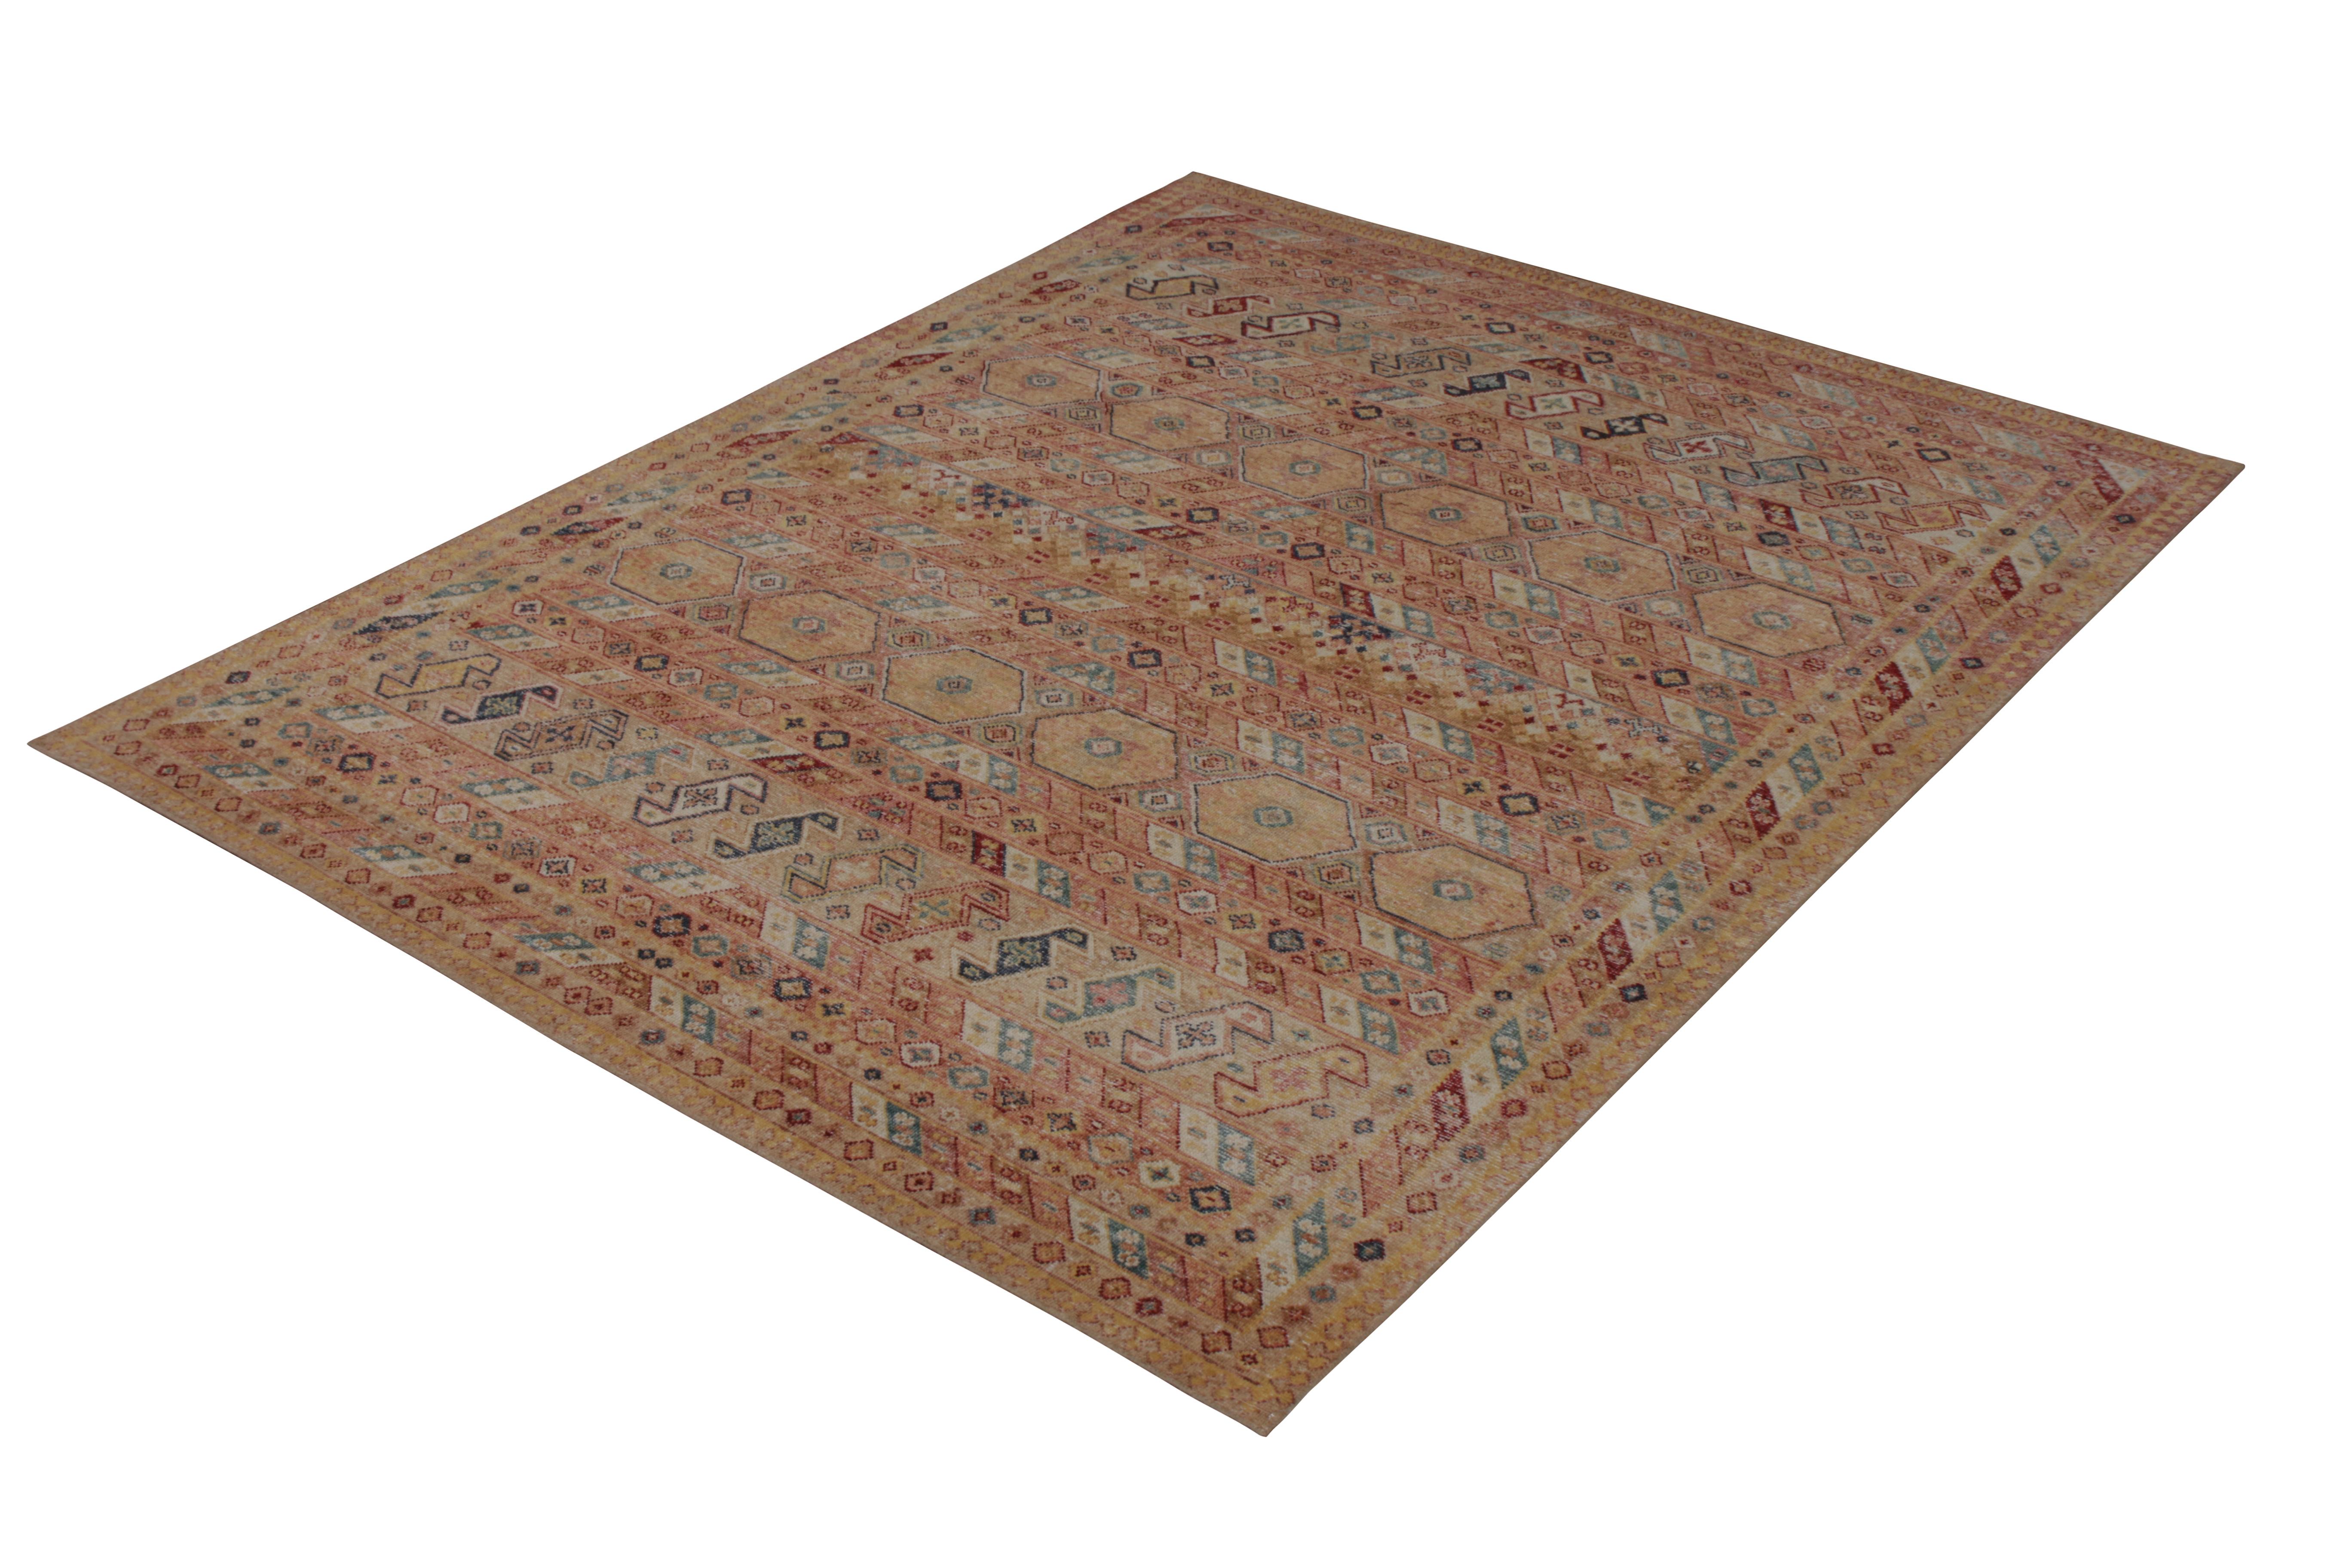 A beige-brown and red ode to classic geometric rug styles joining Rug & Kilim’s Homage Collection. Hand knotted in wool, this 8x10 exemplifies the distressed style and texture achieved in this line’s comfortable wash. Easy to maintain, further